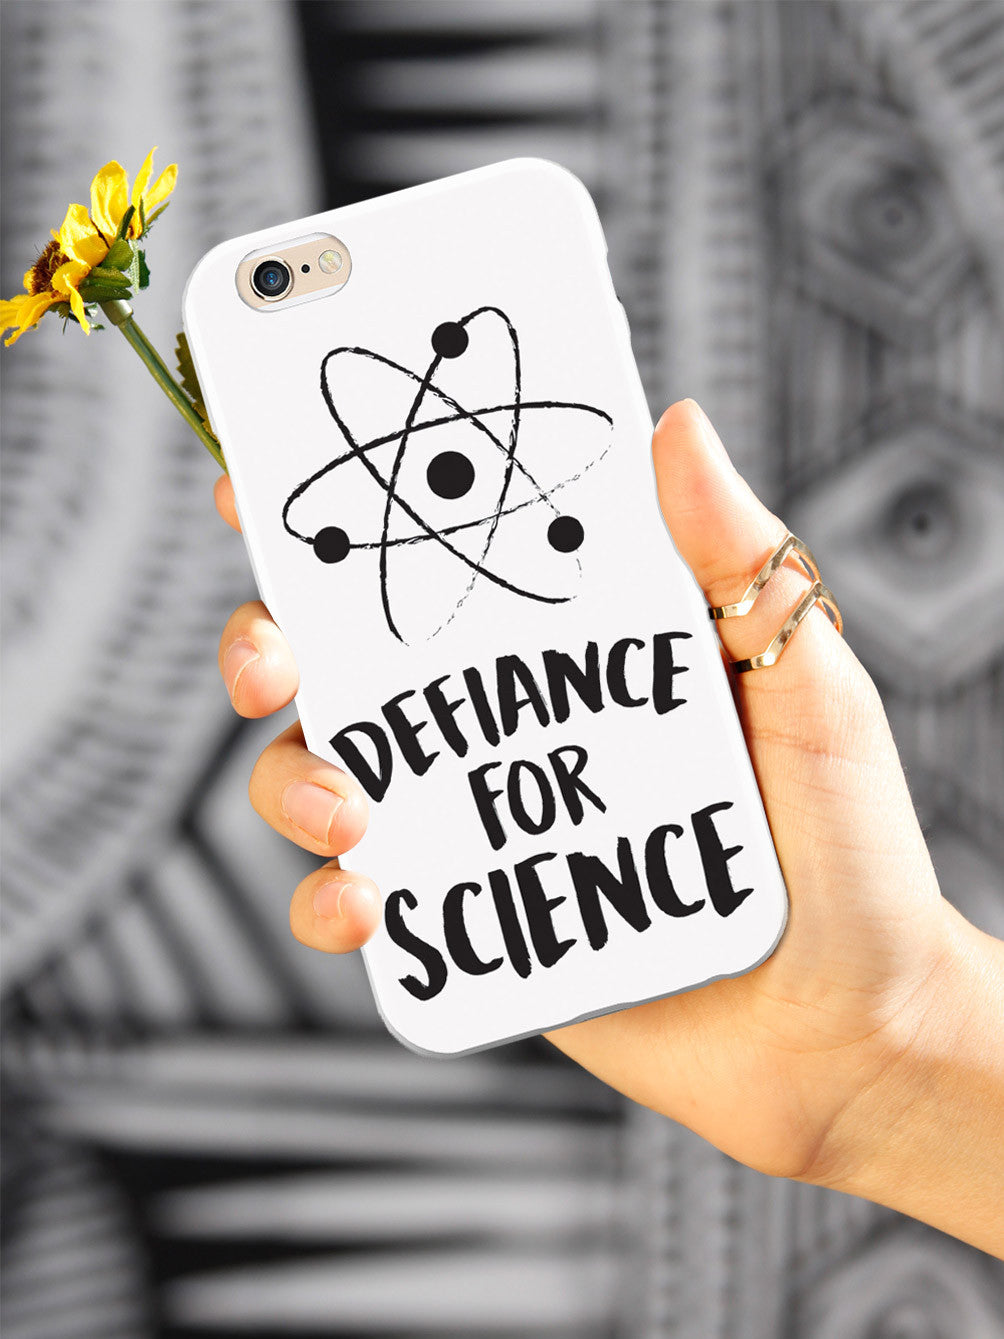 Defiance For Science Case